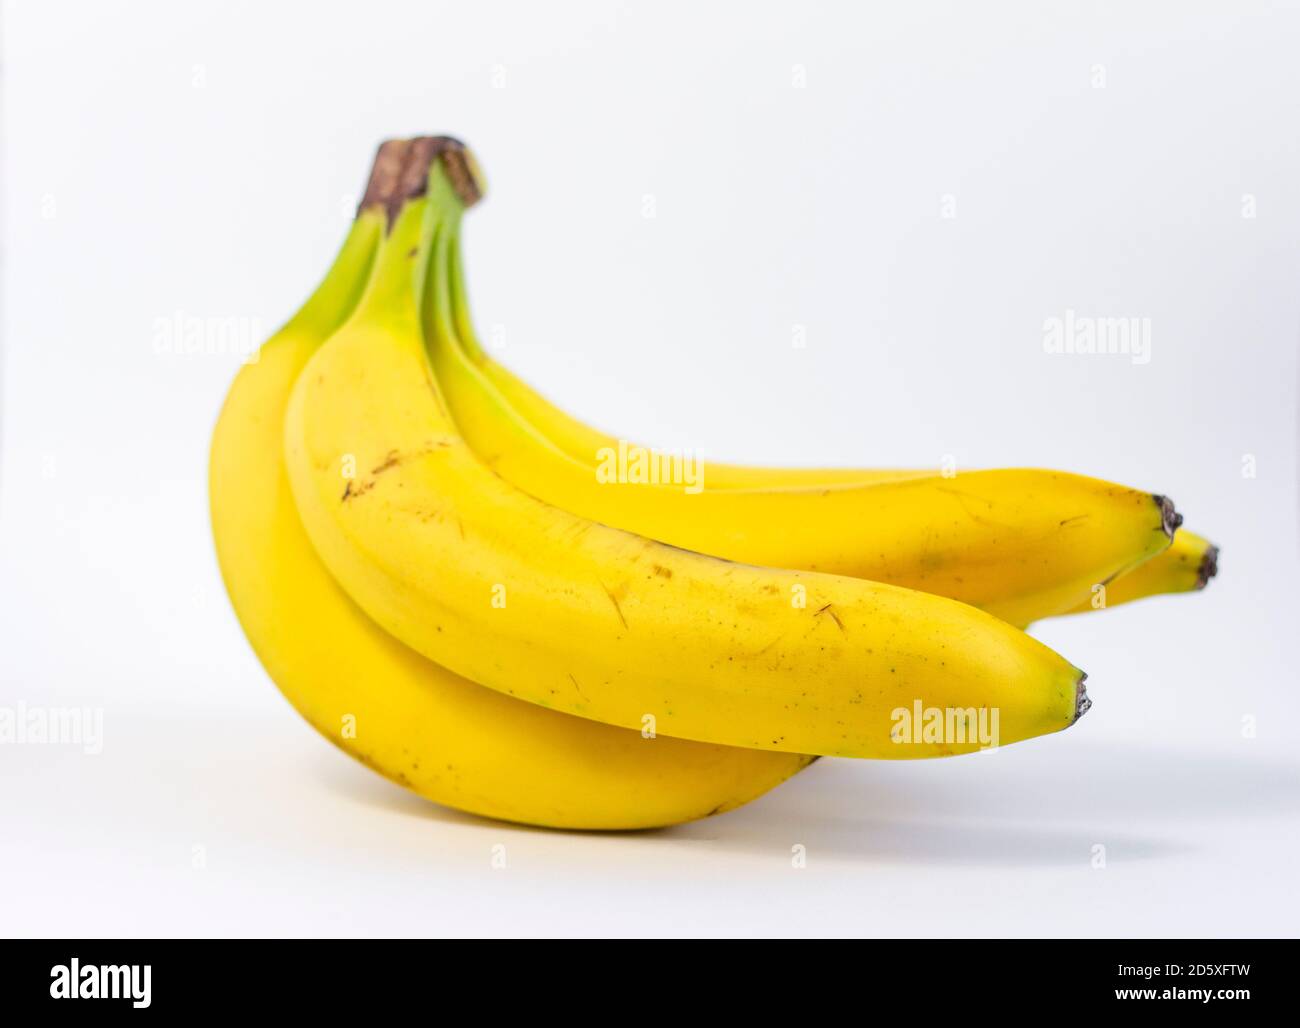 Ripe yellow bananas.A bunch of ripe bananas with dark spots on a white background. Stock Photo